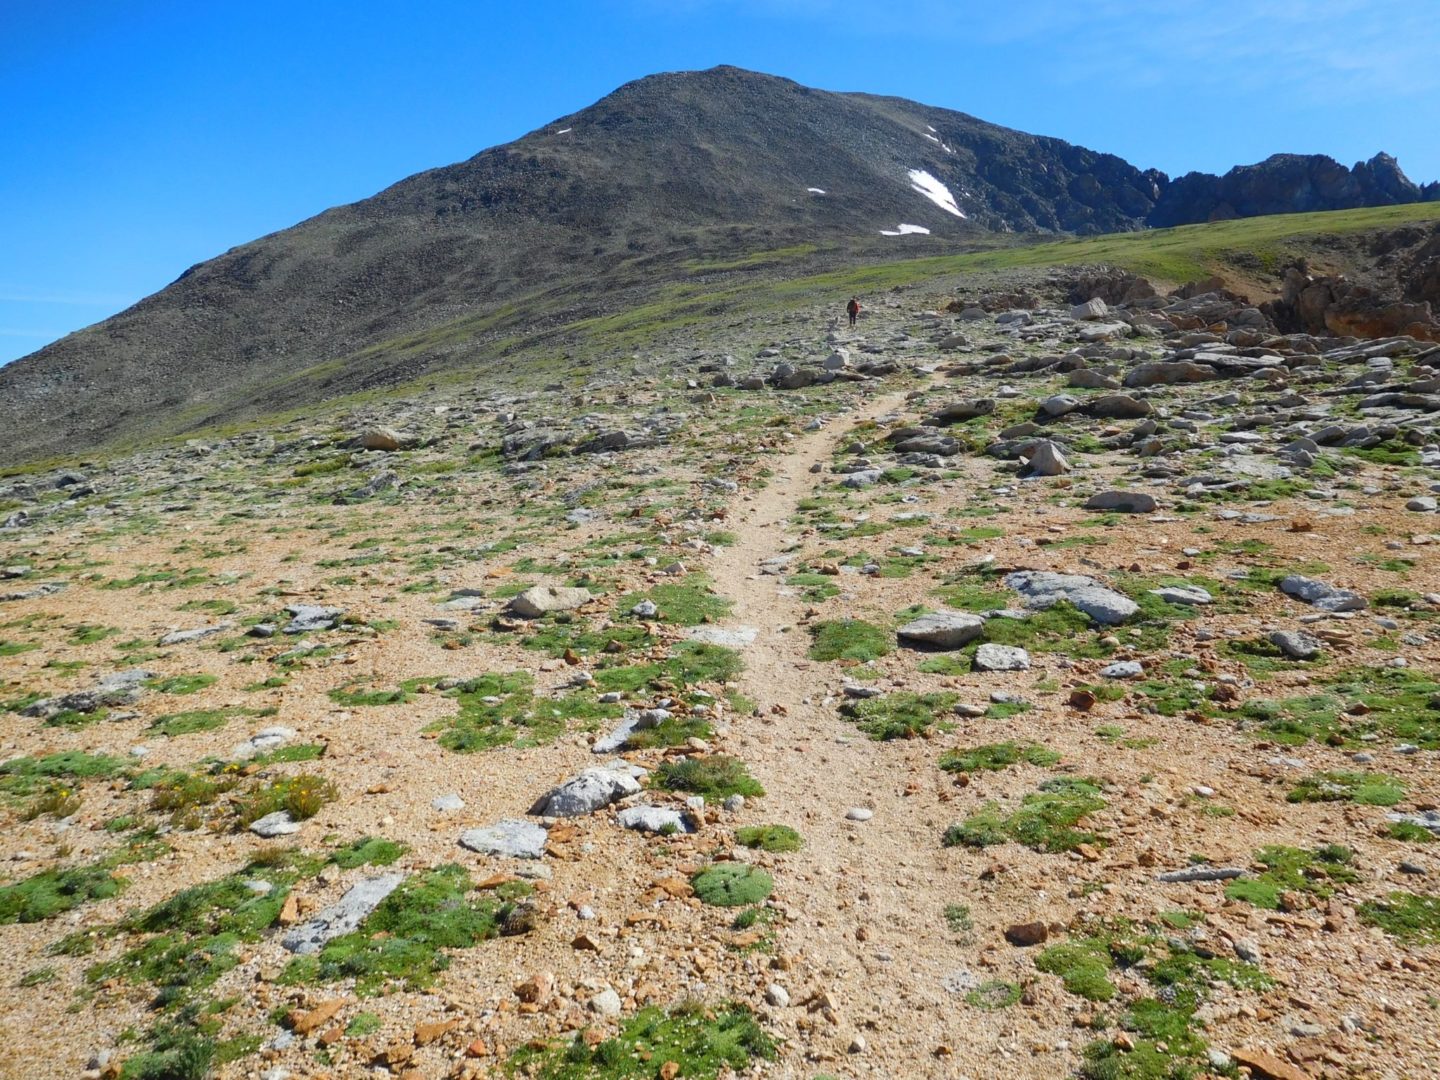 Gaining the southwest ridge requires climbing up a large boulder and talus field with a steep elevation gain